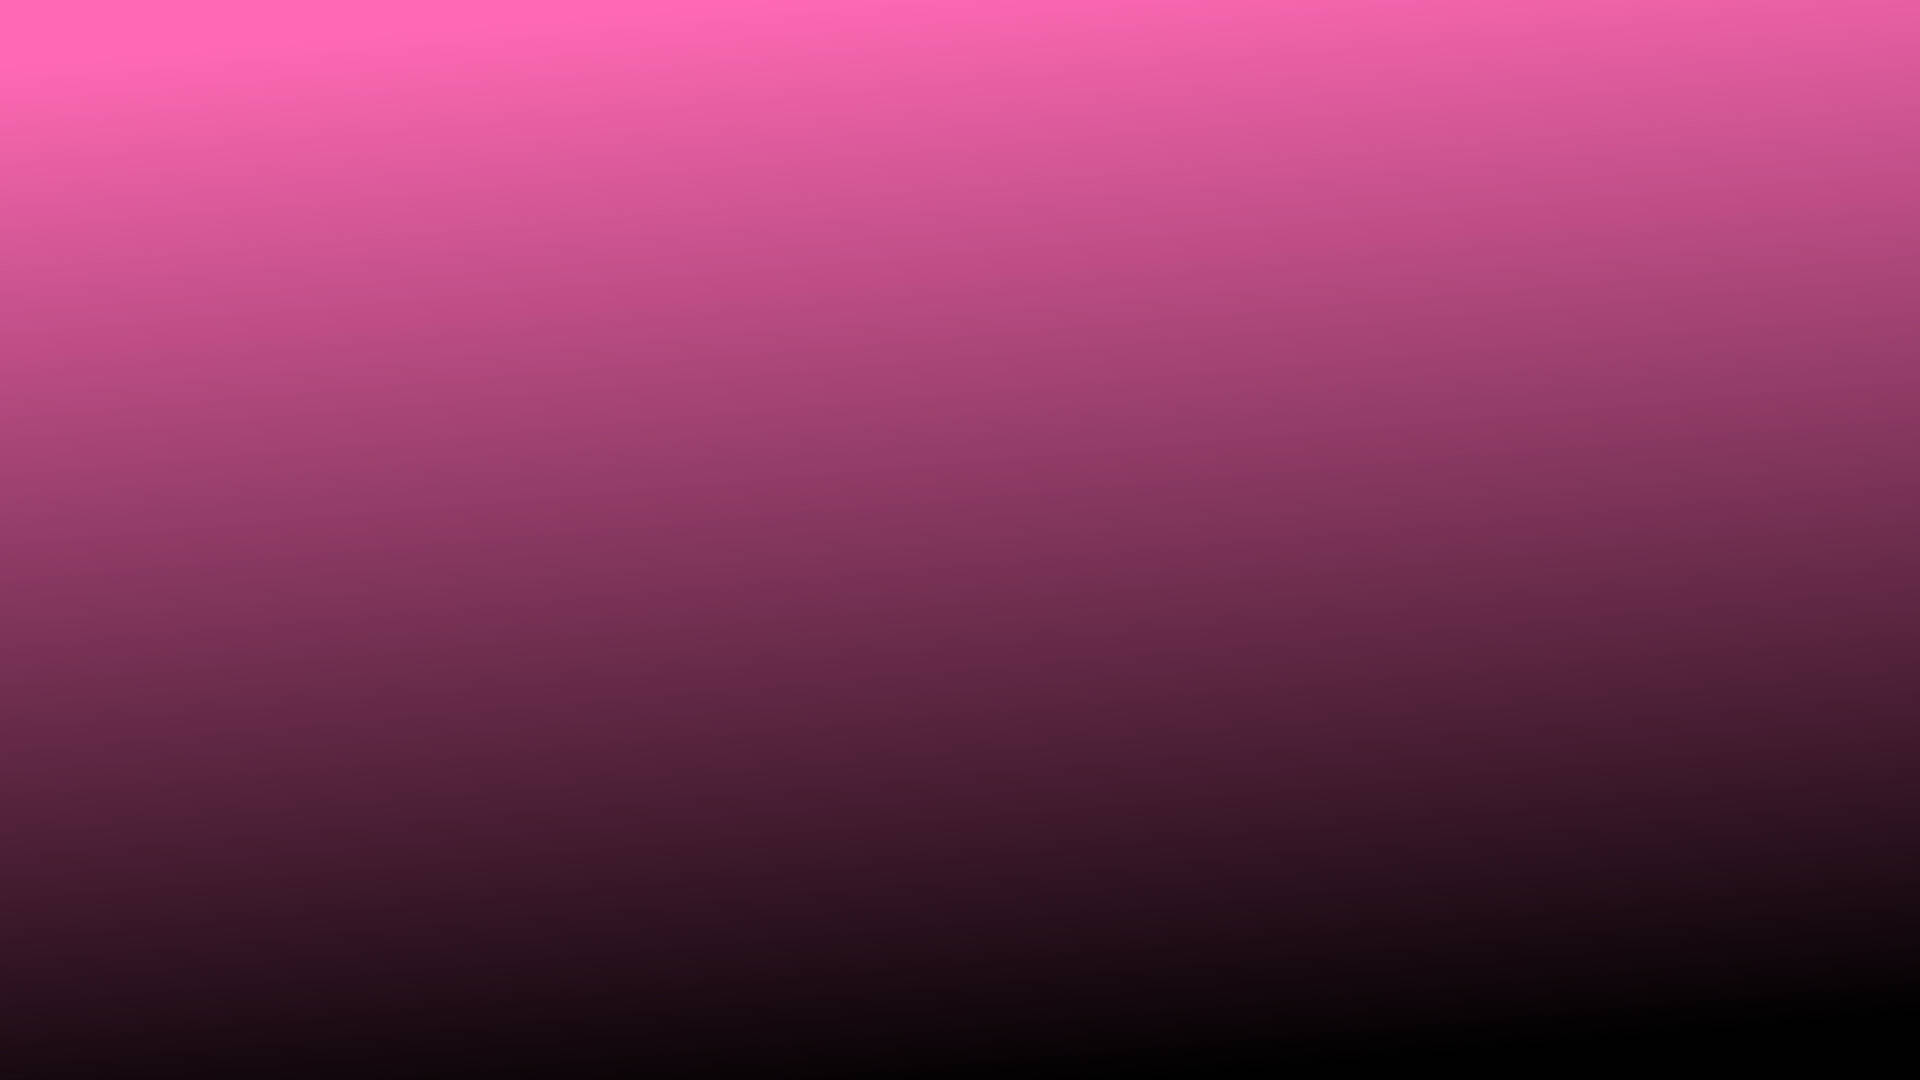 Black And Pink Aesthetic Horizontal Gradient Picture